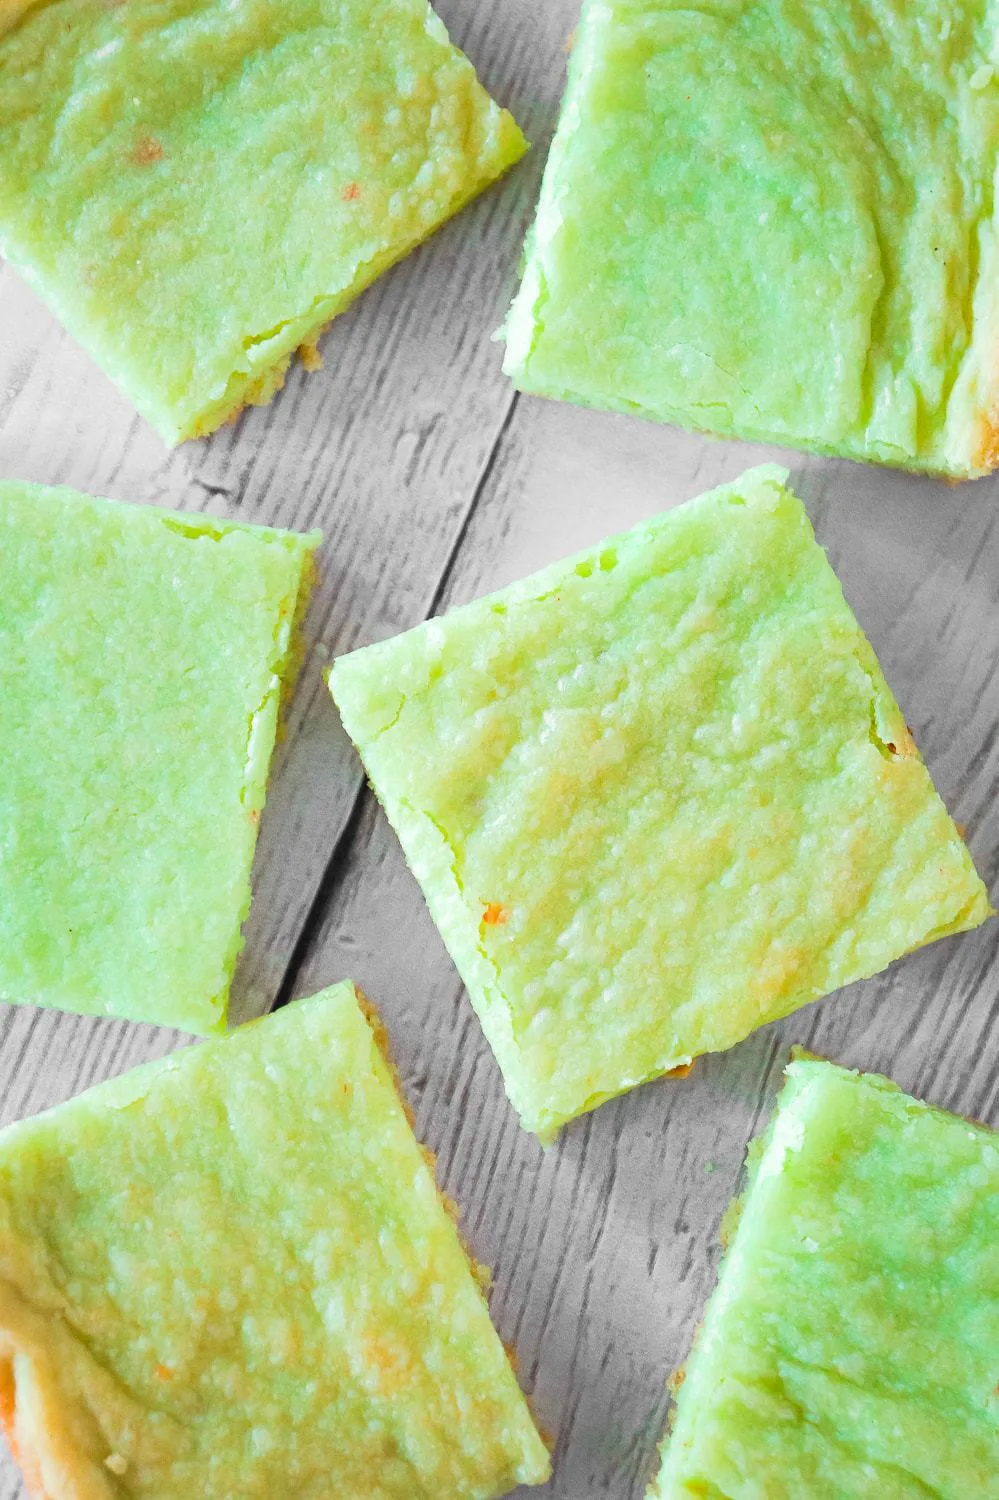 Pistachio Pudding Sugar Cookie Bars are soft, chewy and delicious. This super easy cookie bar recipe uses pistachio instant pudding mix and Betty Crocker sugar cookie mix.